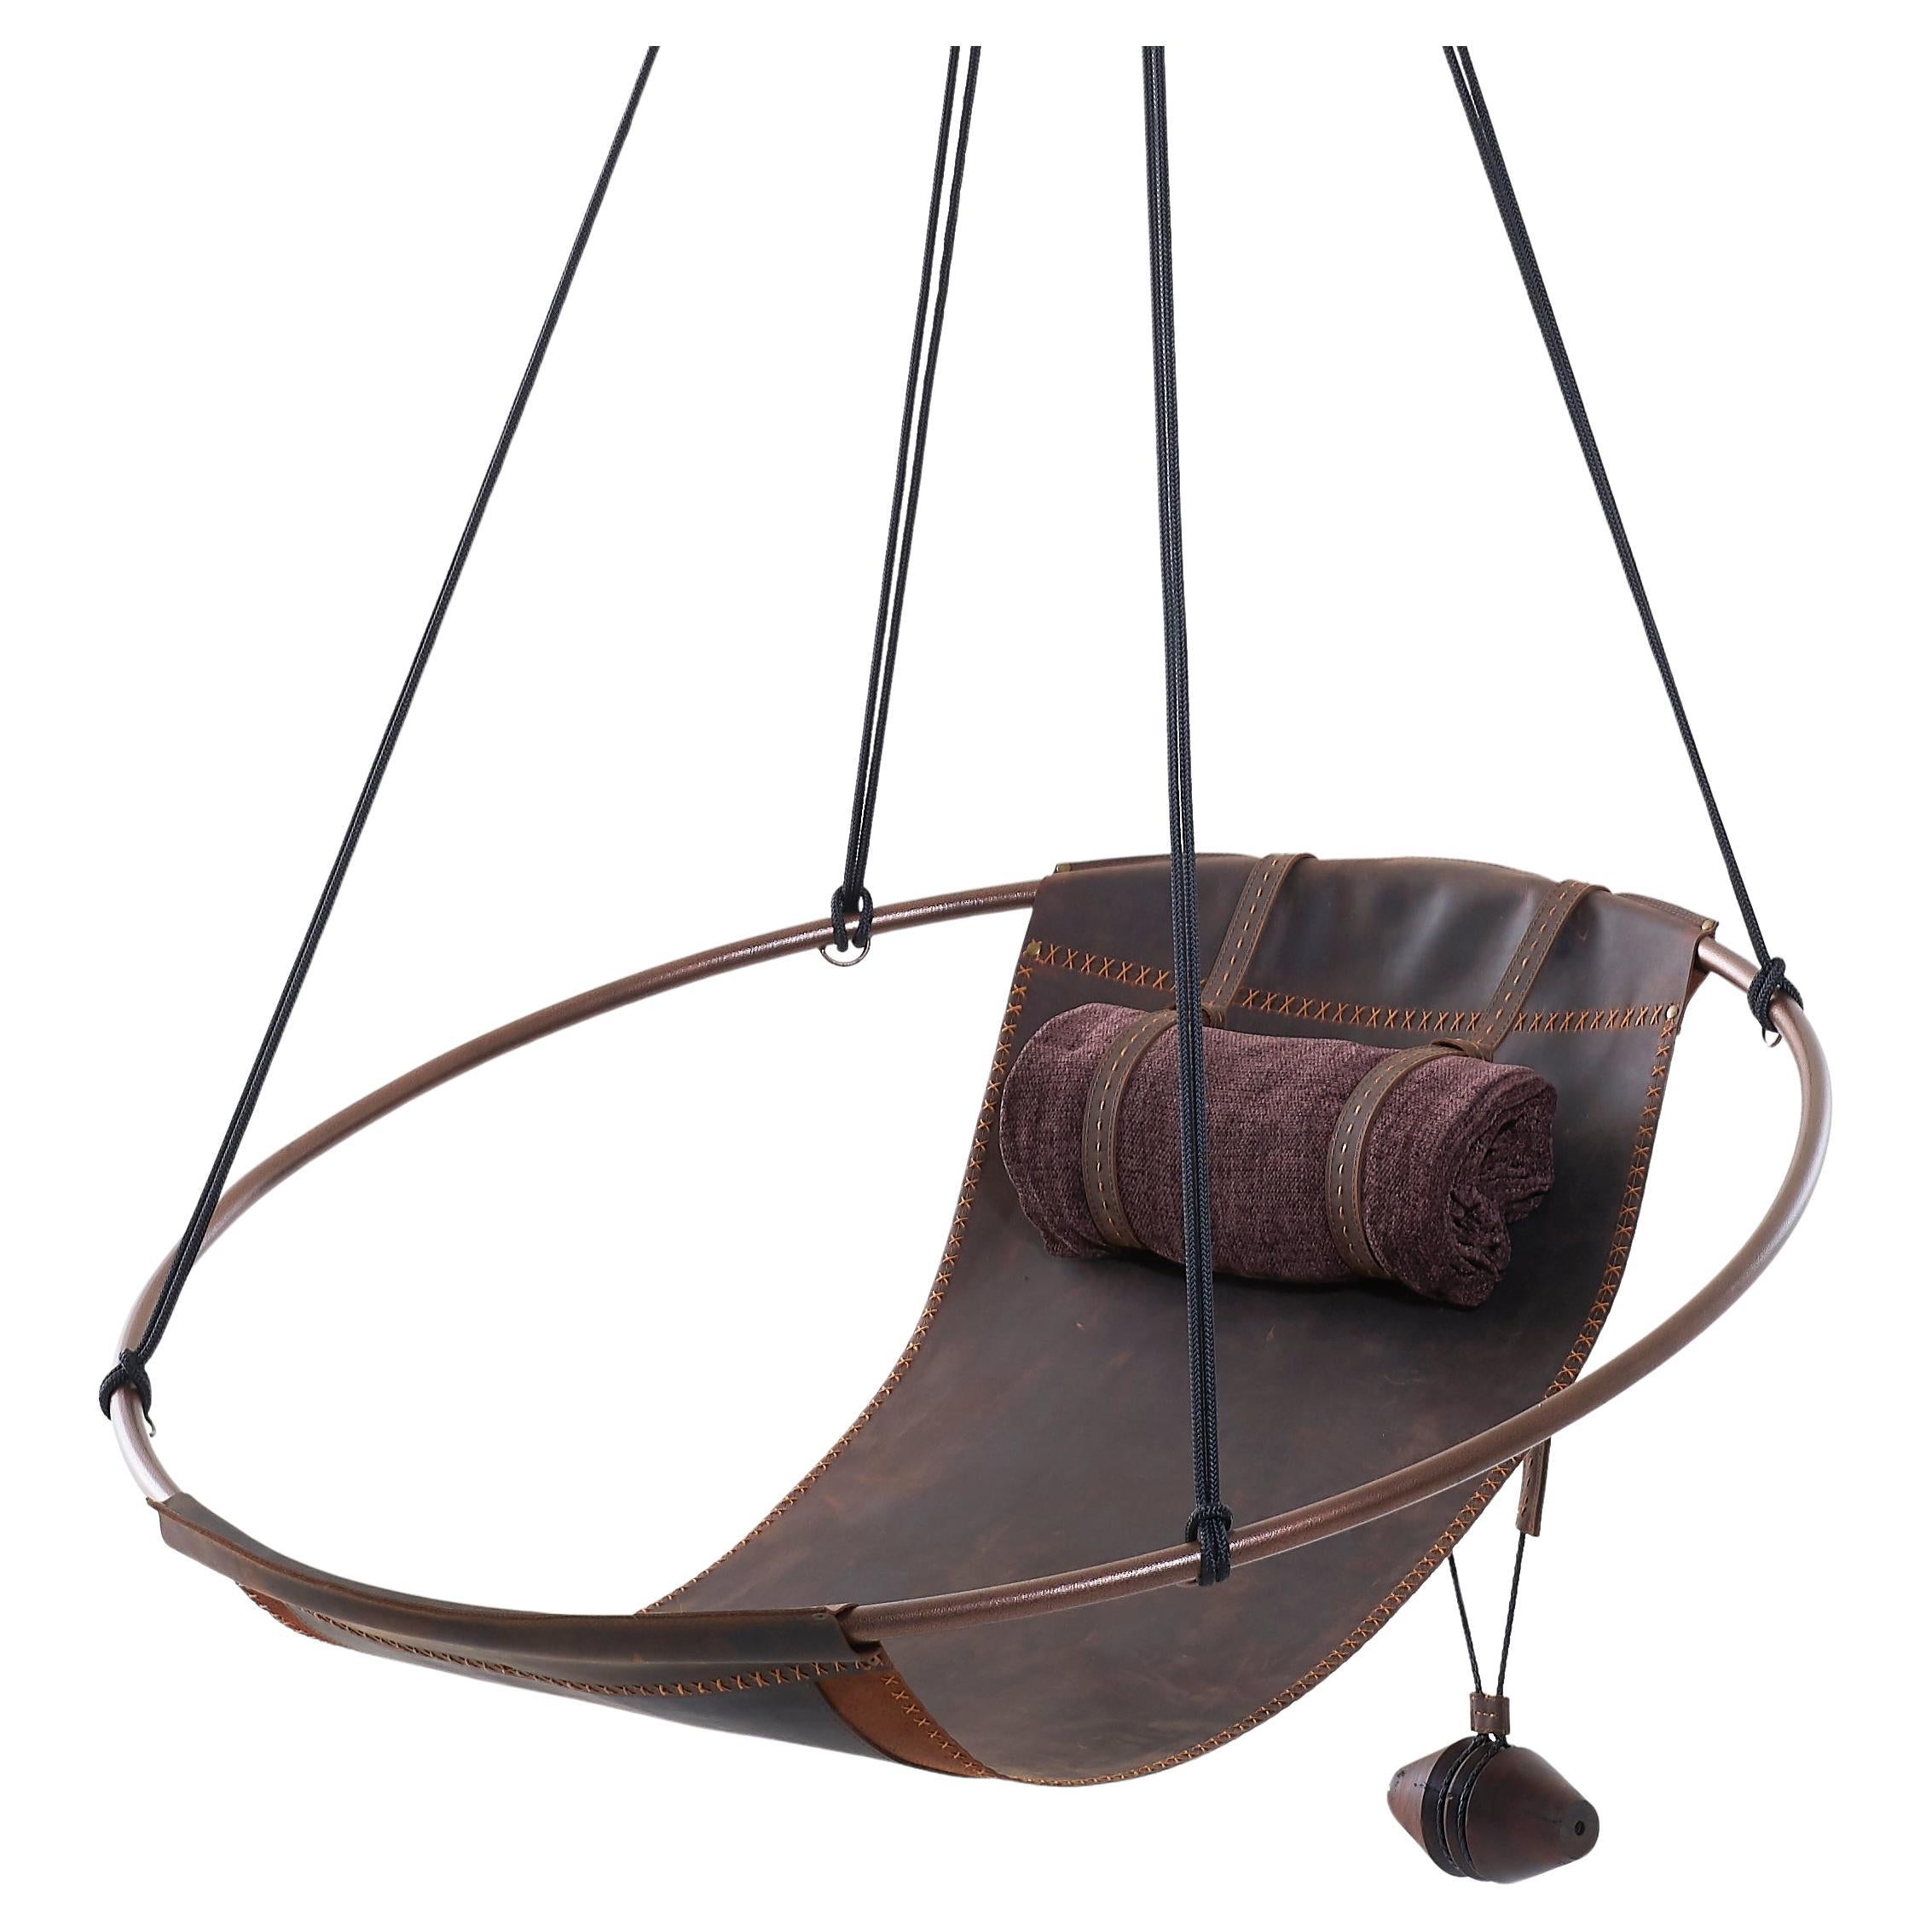 Modern Pull Up Leather Sling Hanging Swing Lounge Chair For Sale